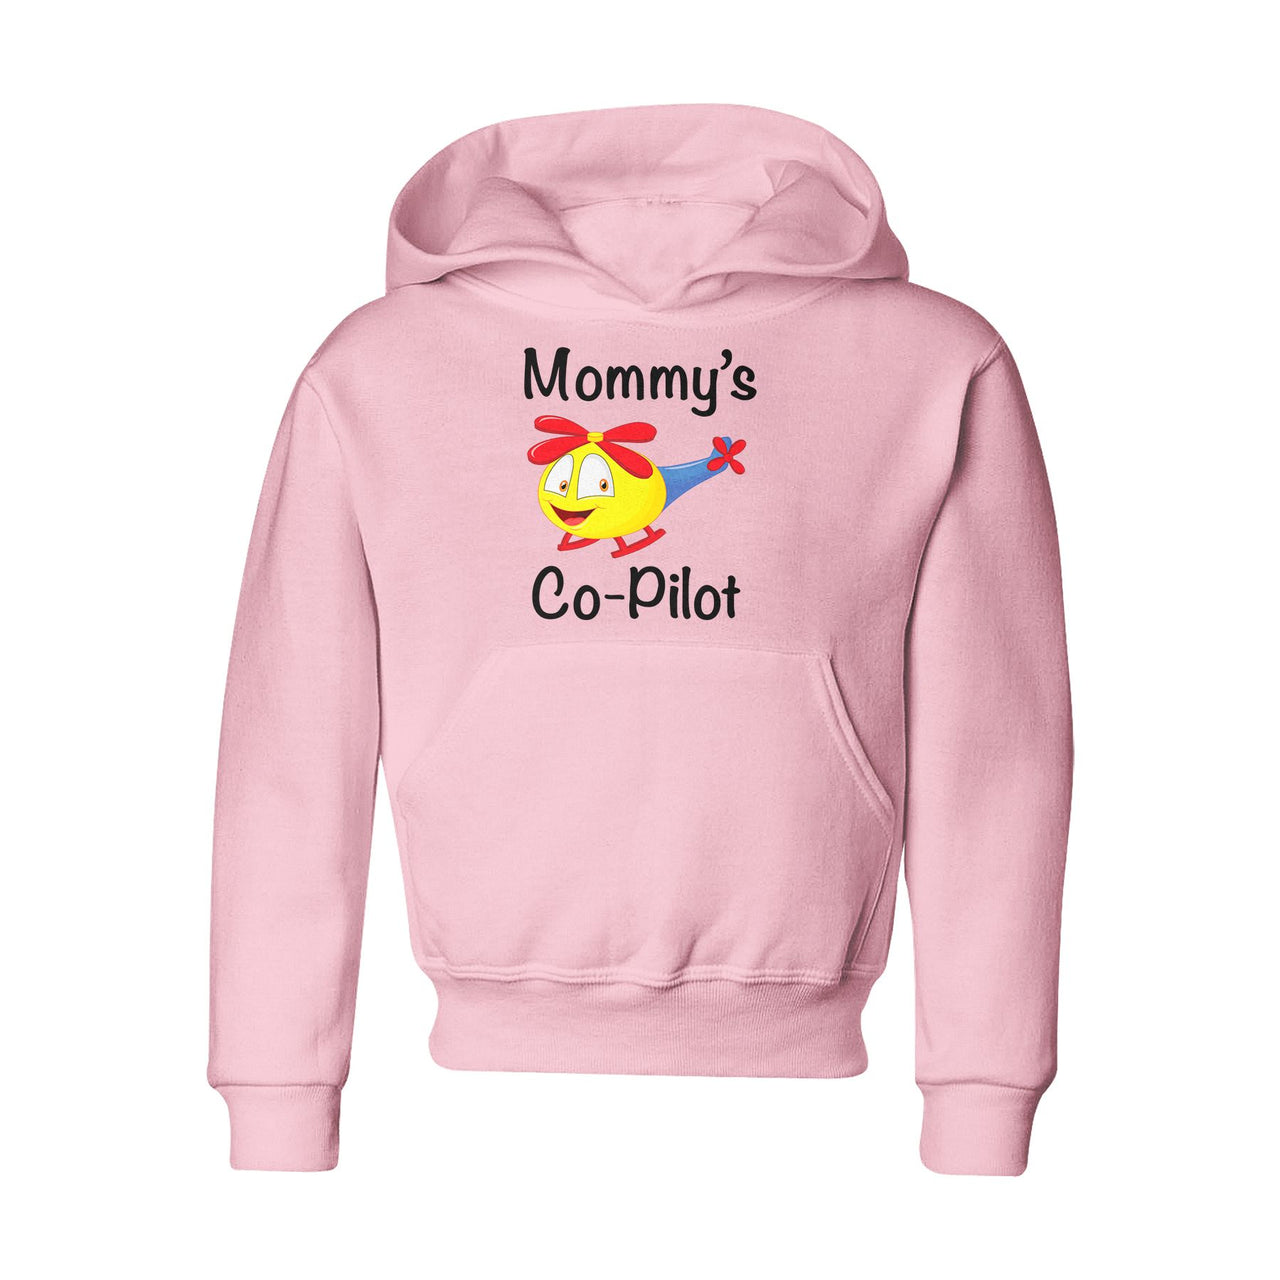 Mommy's Co-Pilot (Helicopter) Designed "CHILDREN" Hoodies